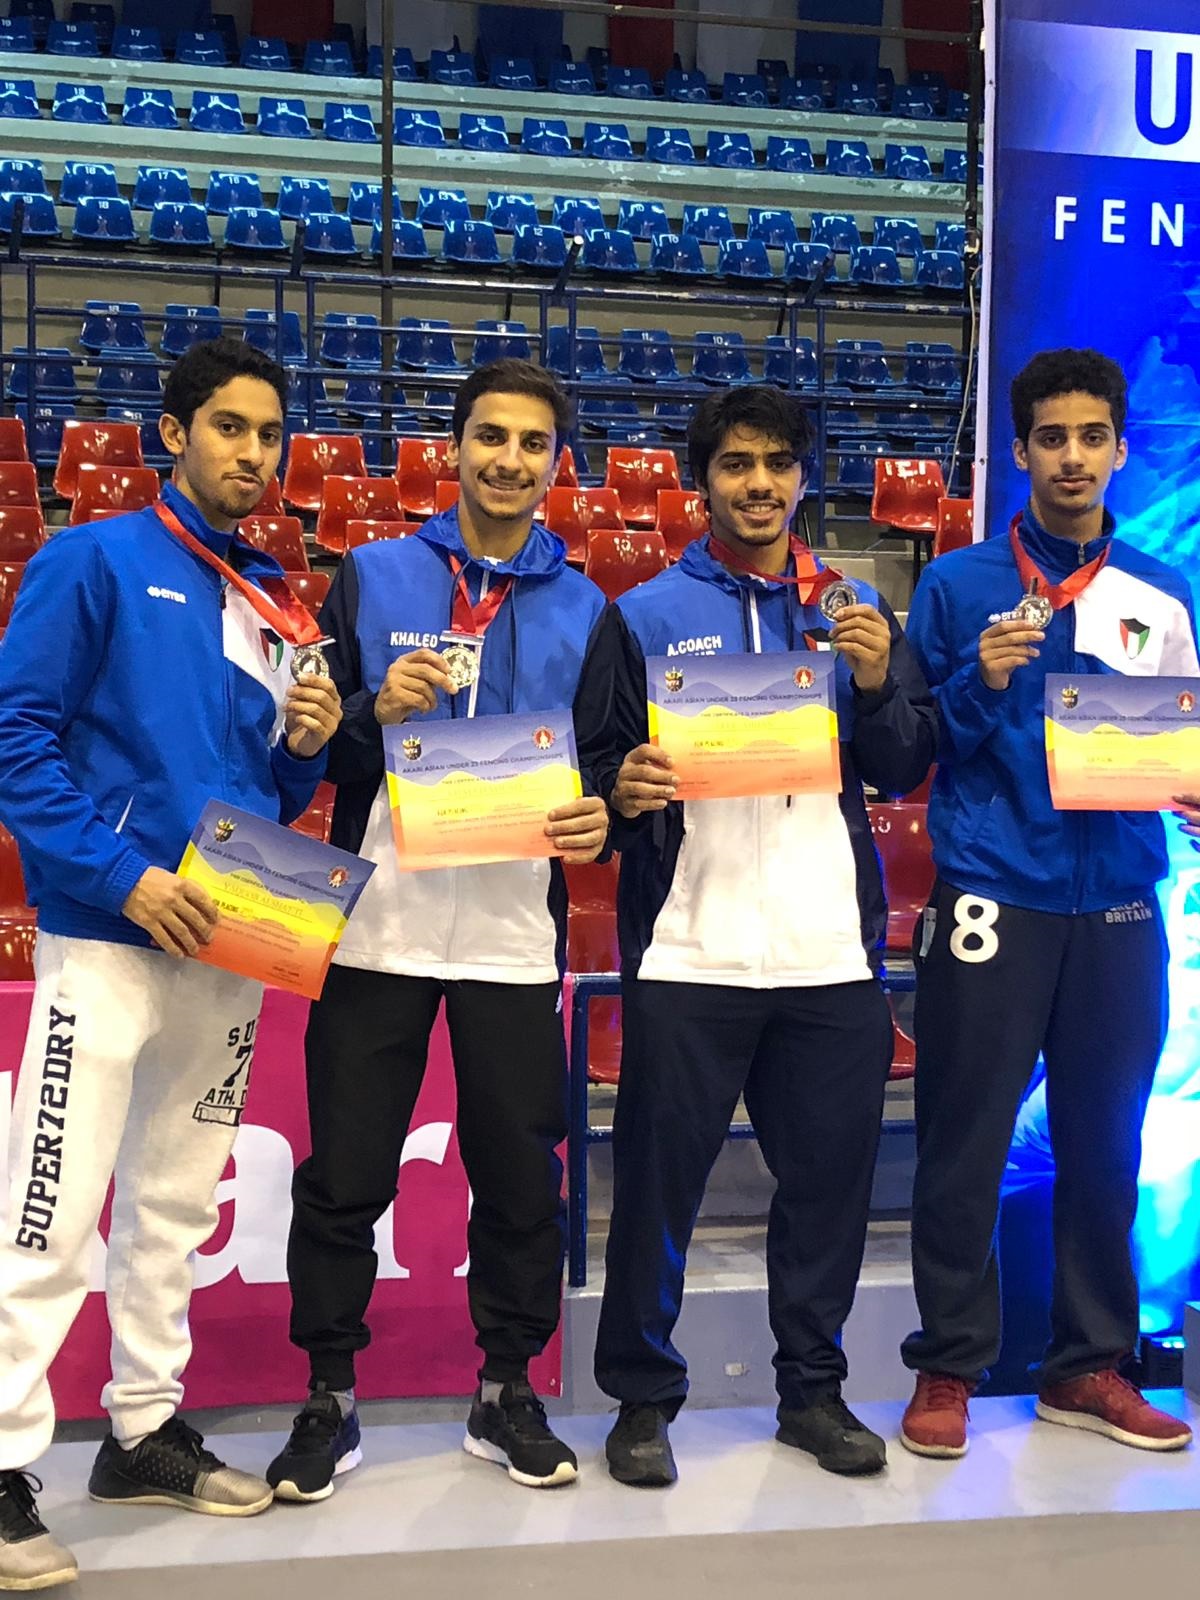 Kuwaiti player wins silver medal in Foil fencing Asia tourney